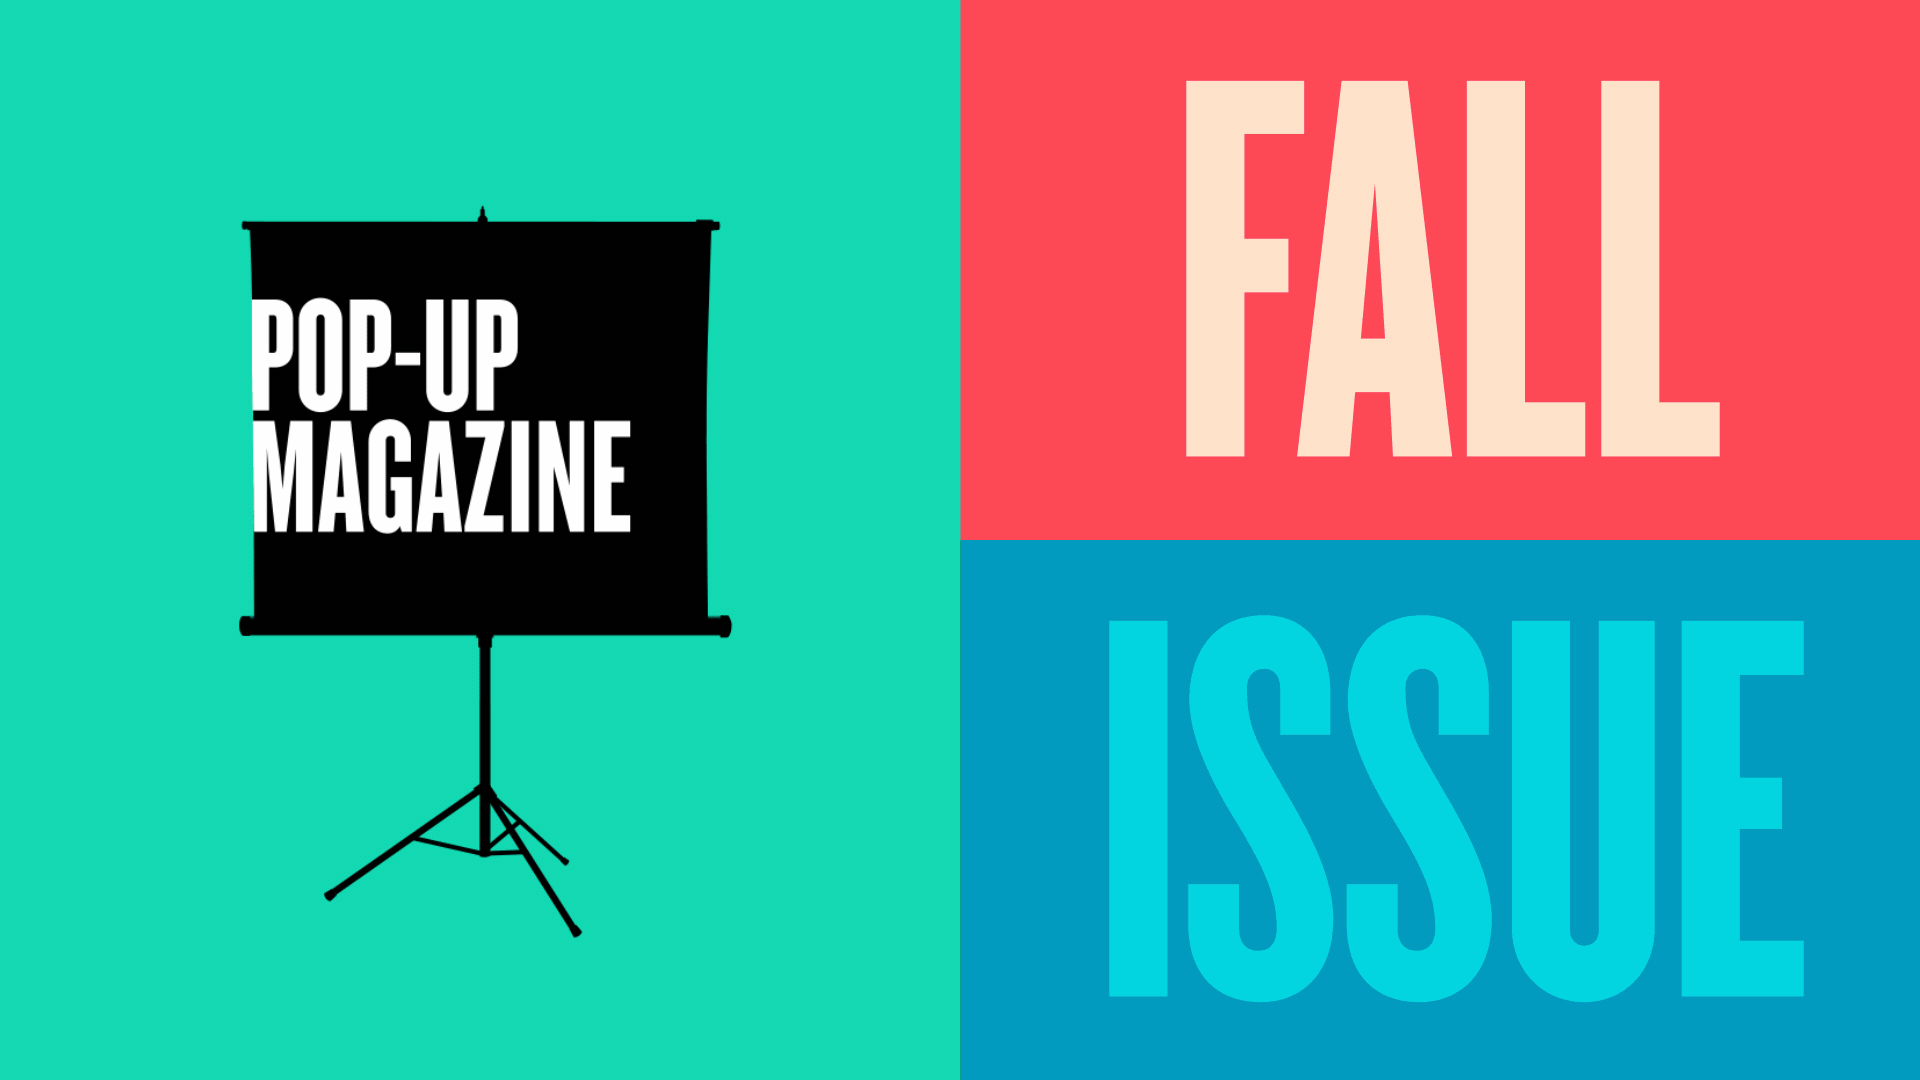 Pop-Up Magazine Fall Issue - 2021